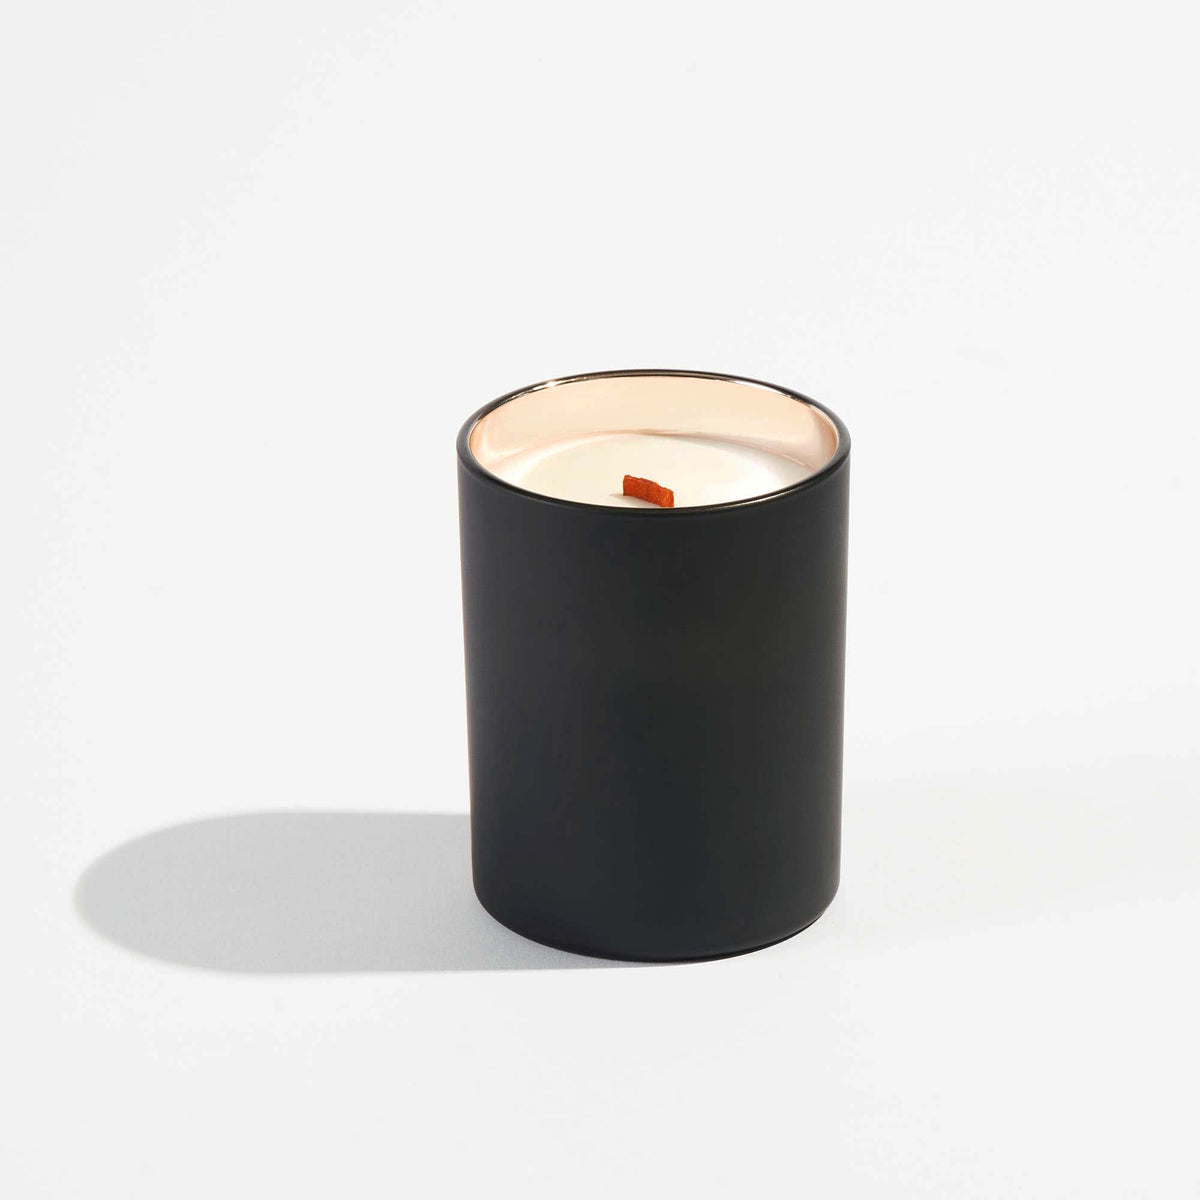 Diwali Candle | Luxury Candles &amp; Home Fragrances by Light + Glo